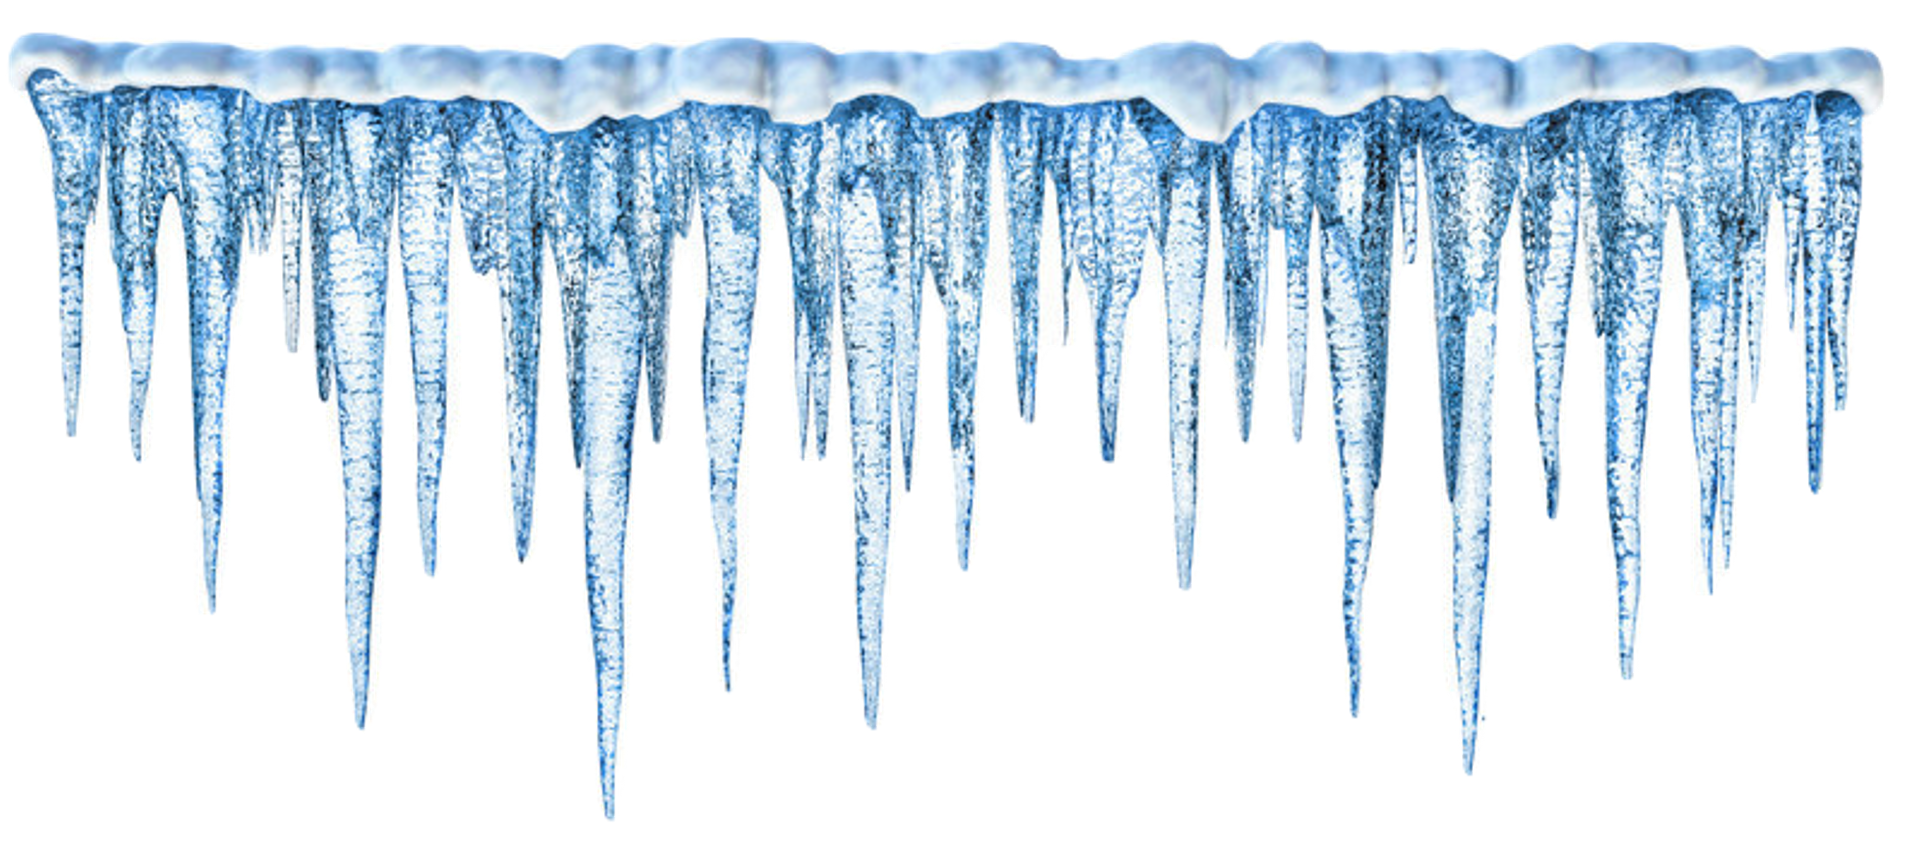 free download clip art icicle illustration